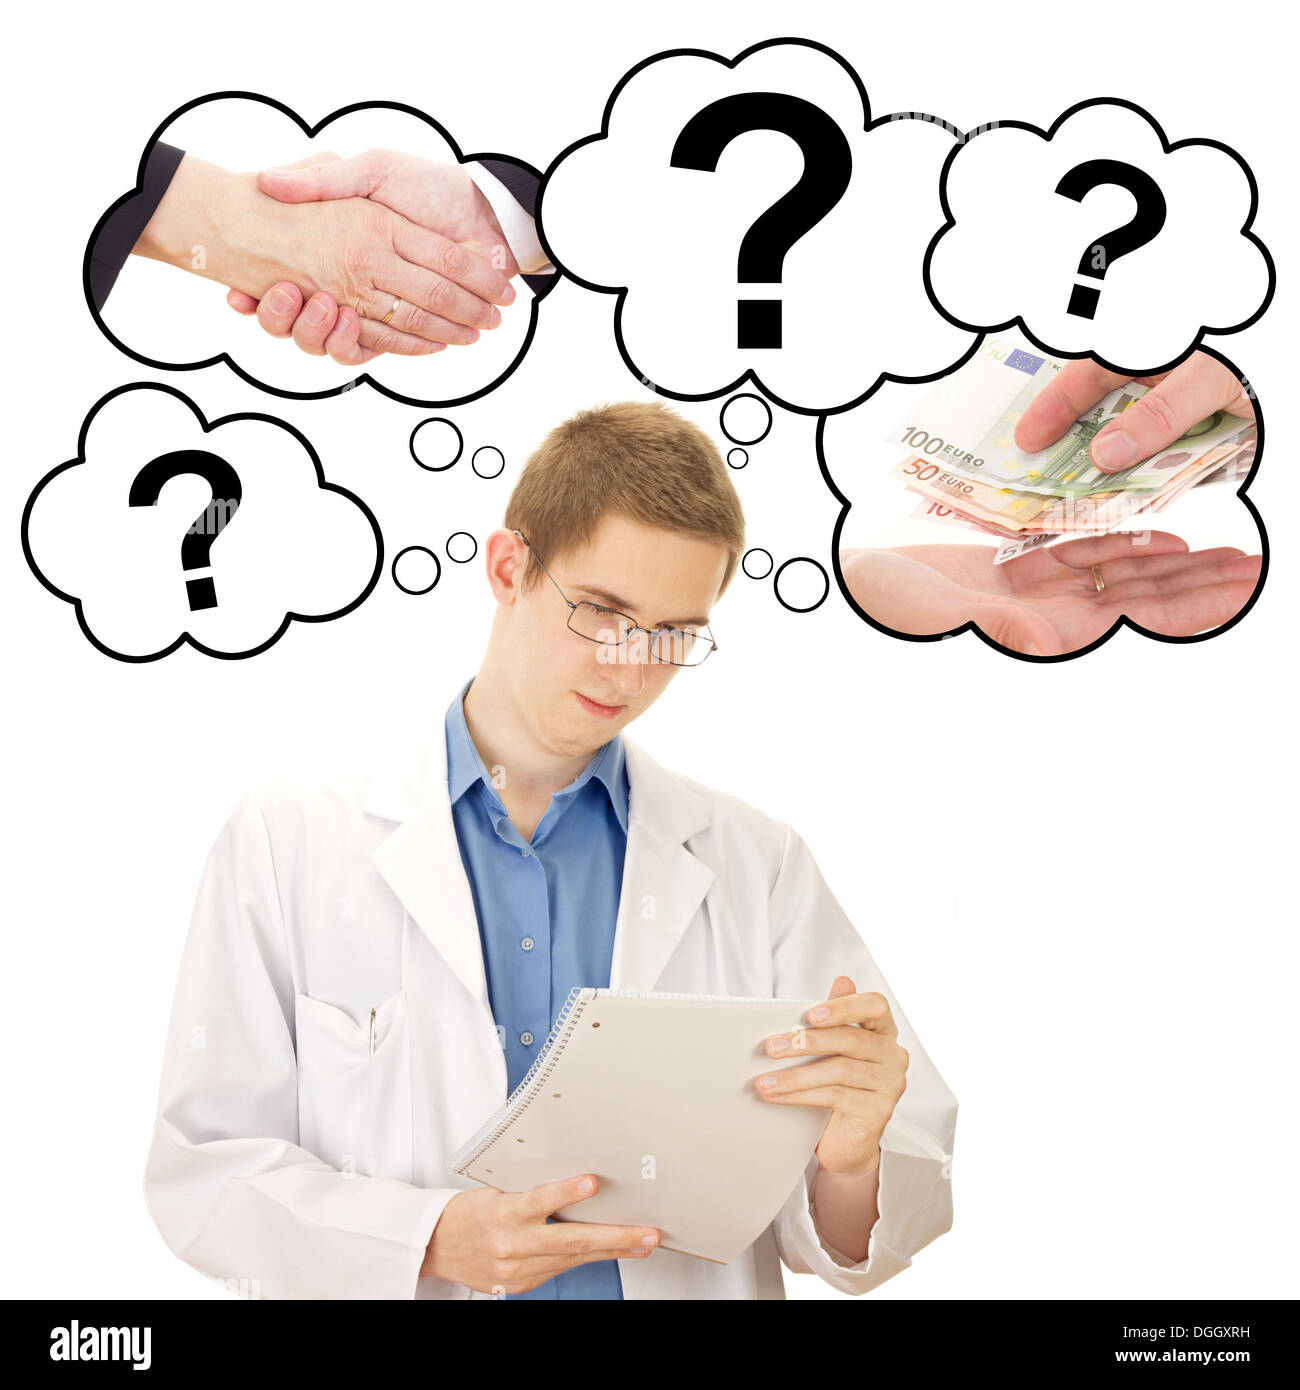 Young man thinking about his job as medical doctor Stock Photo